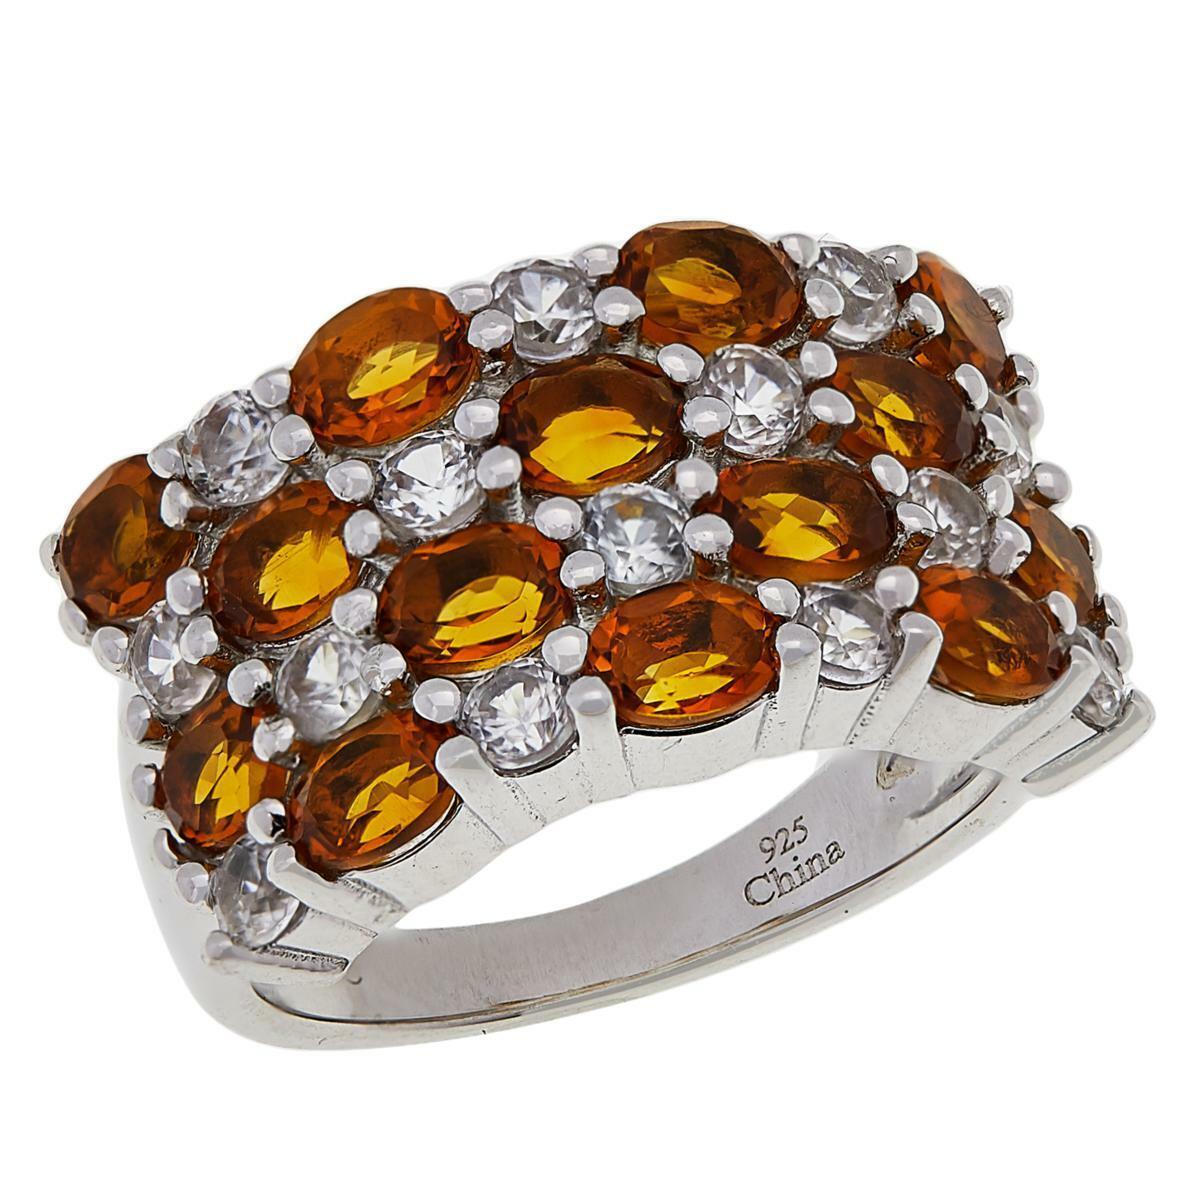 Colleen Lopez Citrine and White Zircon 4 Row Band Ring, Size 7